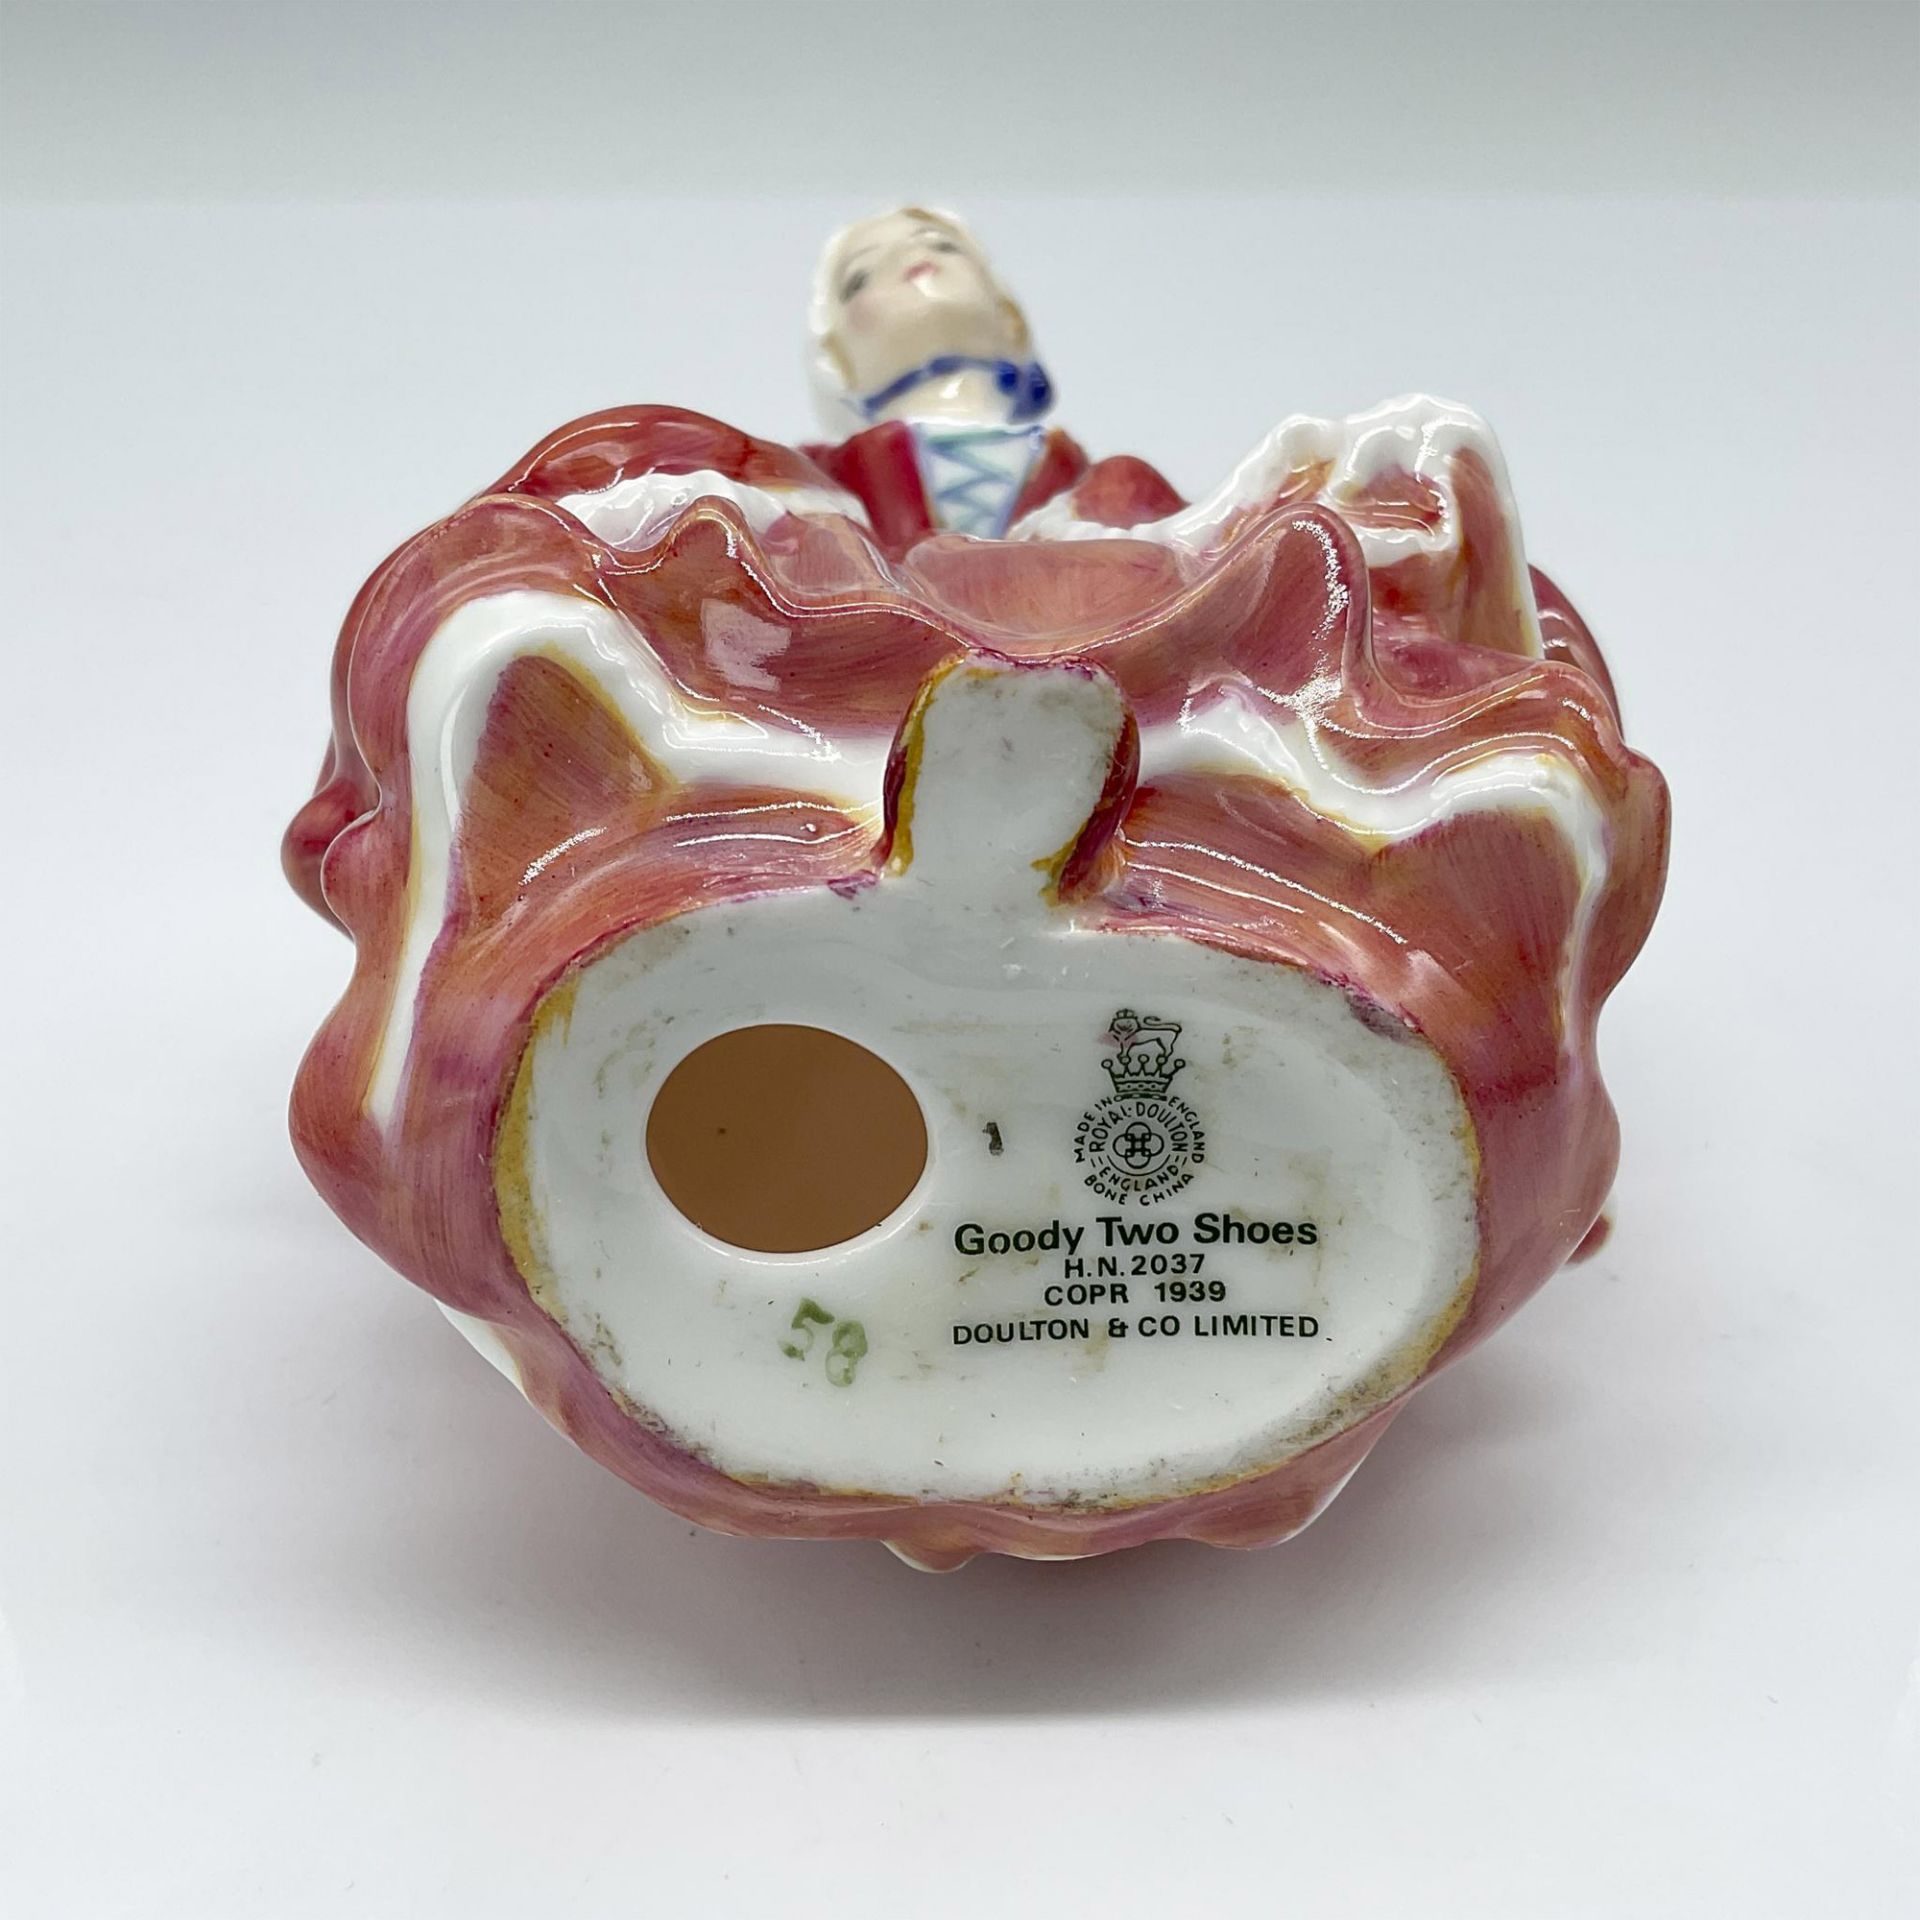 Goody Two Shoes - HN2037 - Royal Doulton Figurine - Image 3 of 3